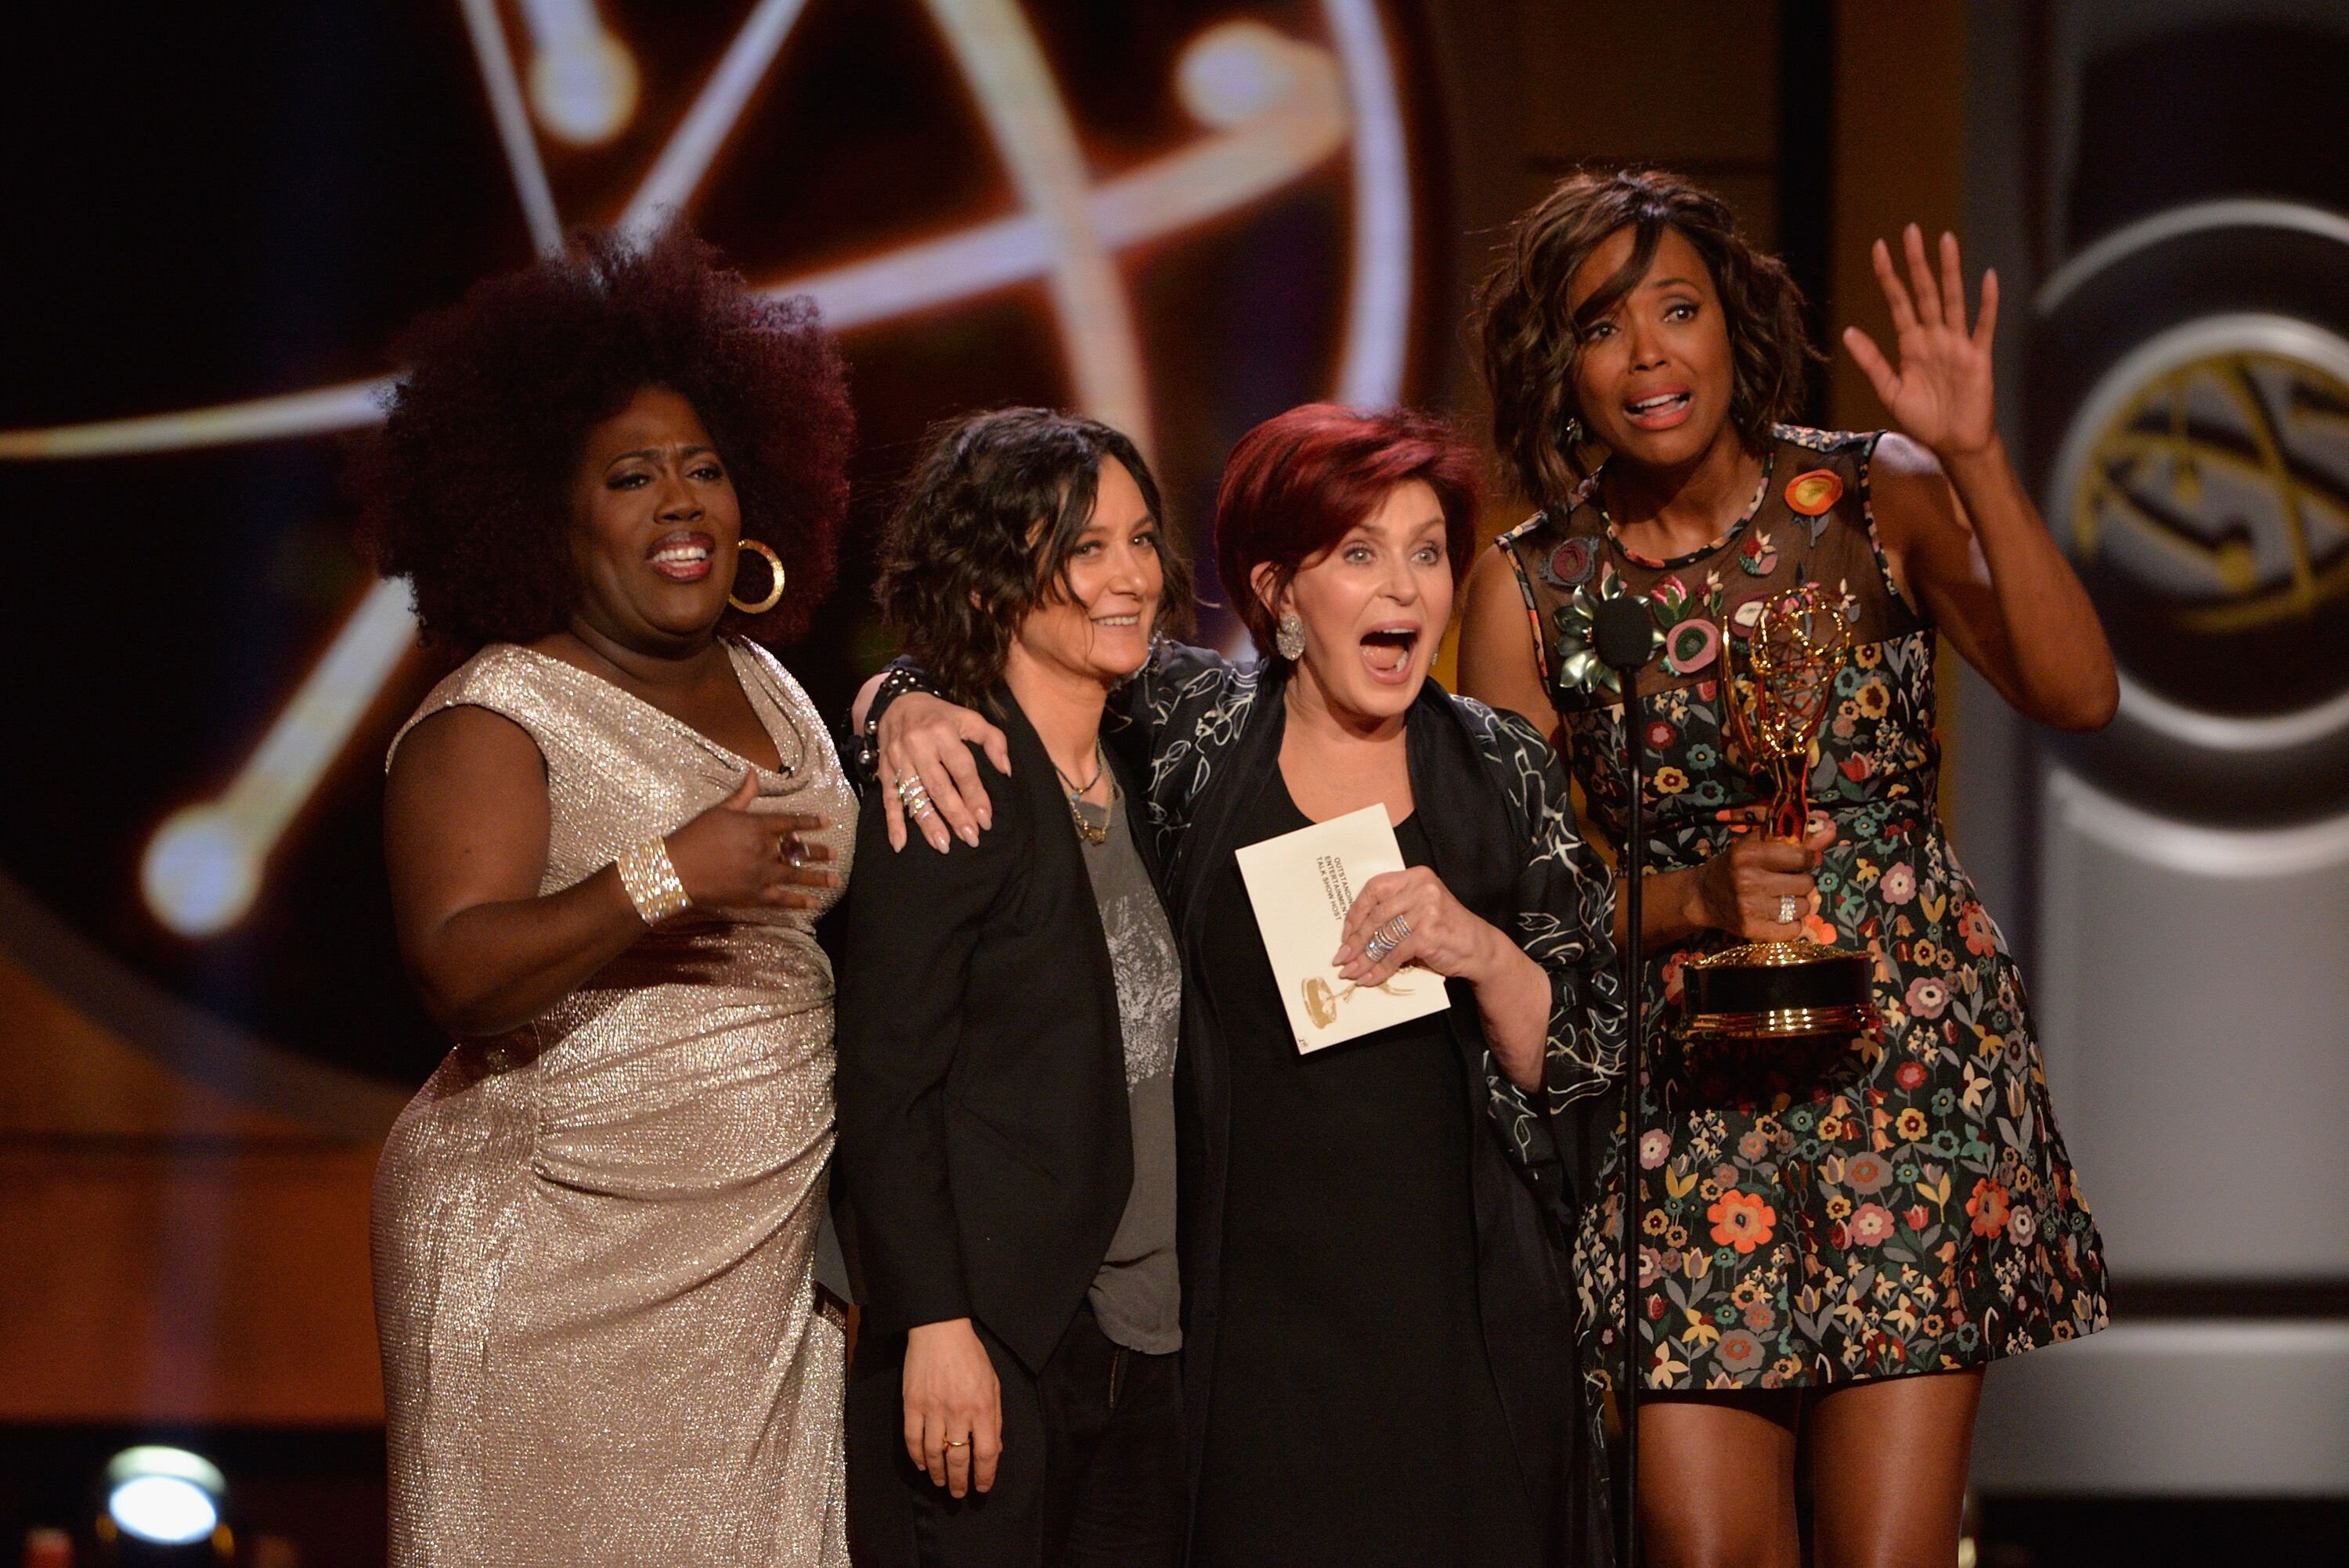 (L - R) Sheryl Underwood, Sara Gilbert, Sharon Osbourne, and Aisha Tyler accept the award for outstanding entertainment talk show host at the 44th annual Daytime Emmy Awards at Pasadena Civic Auditorium on April 30, 2017 in Pasadena, California. | Source: Getty Images